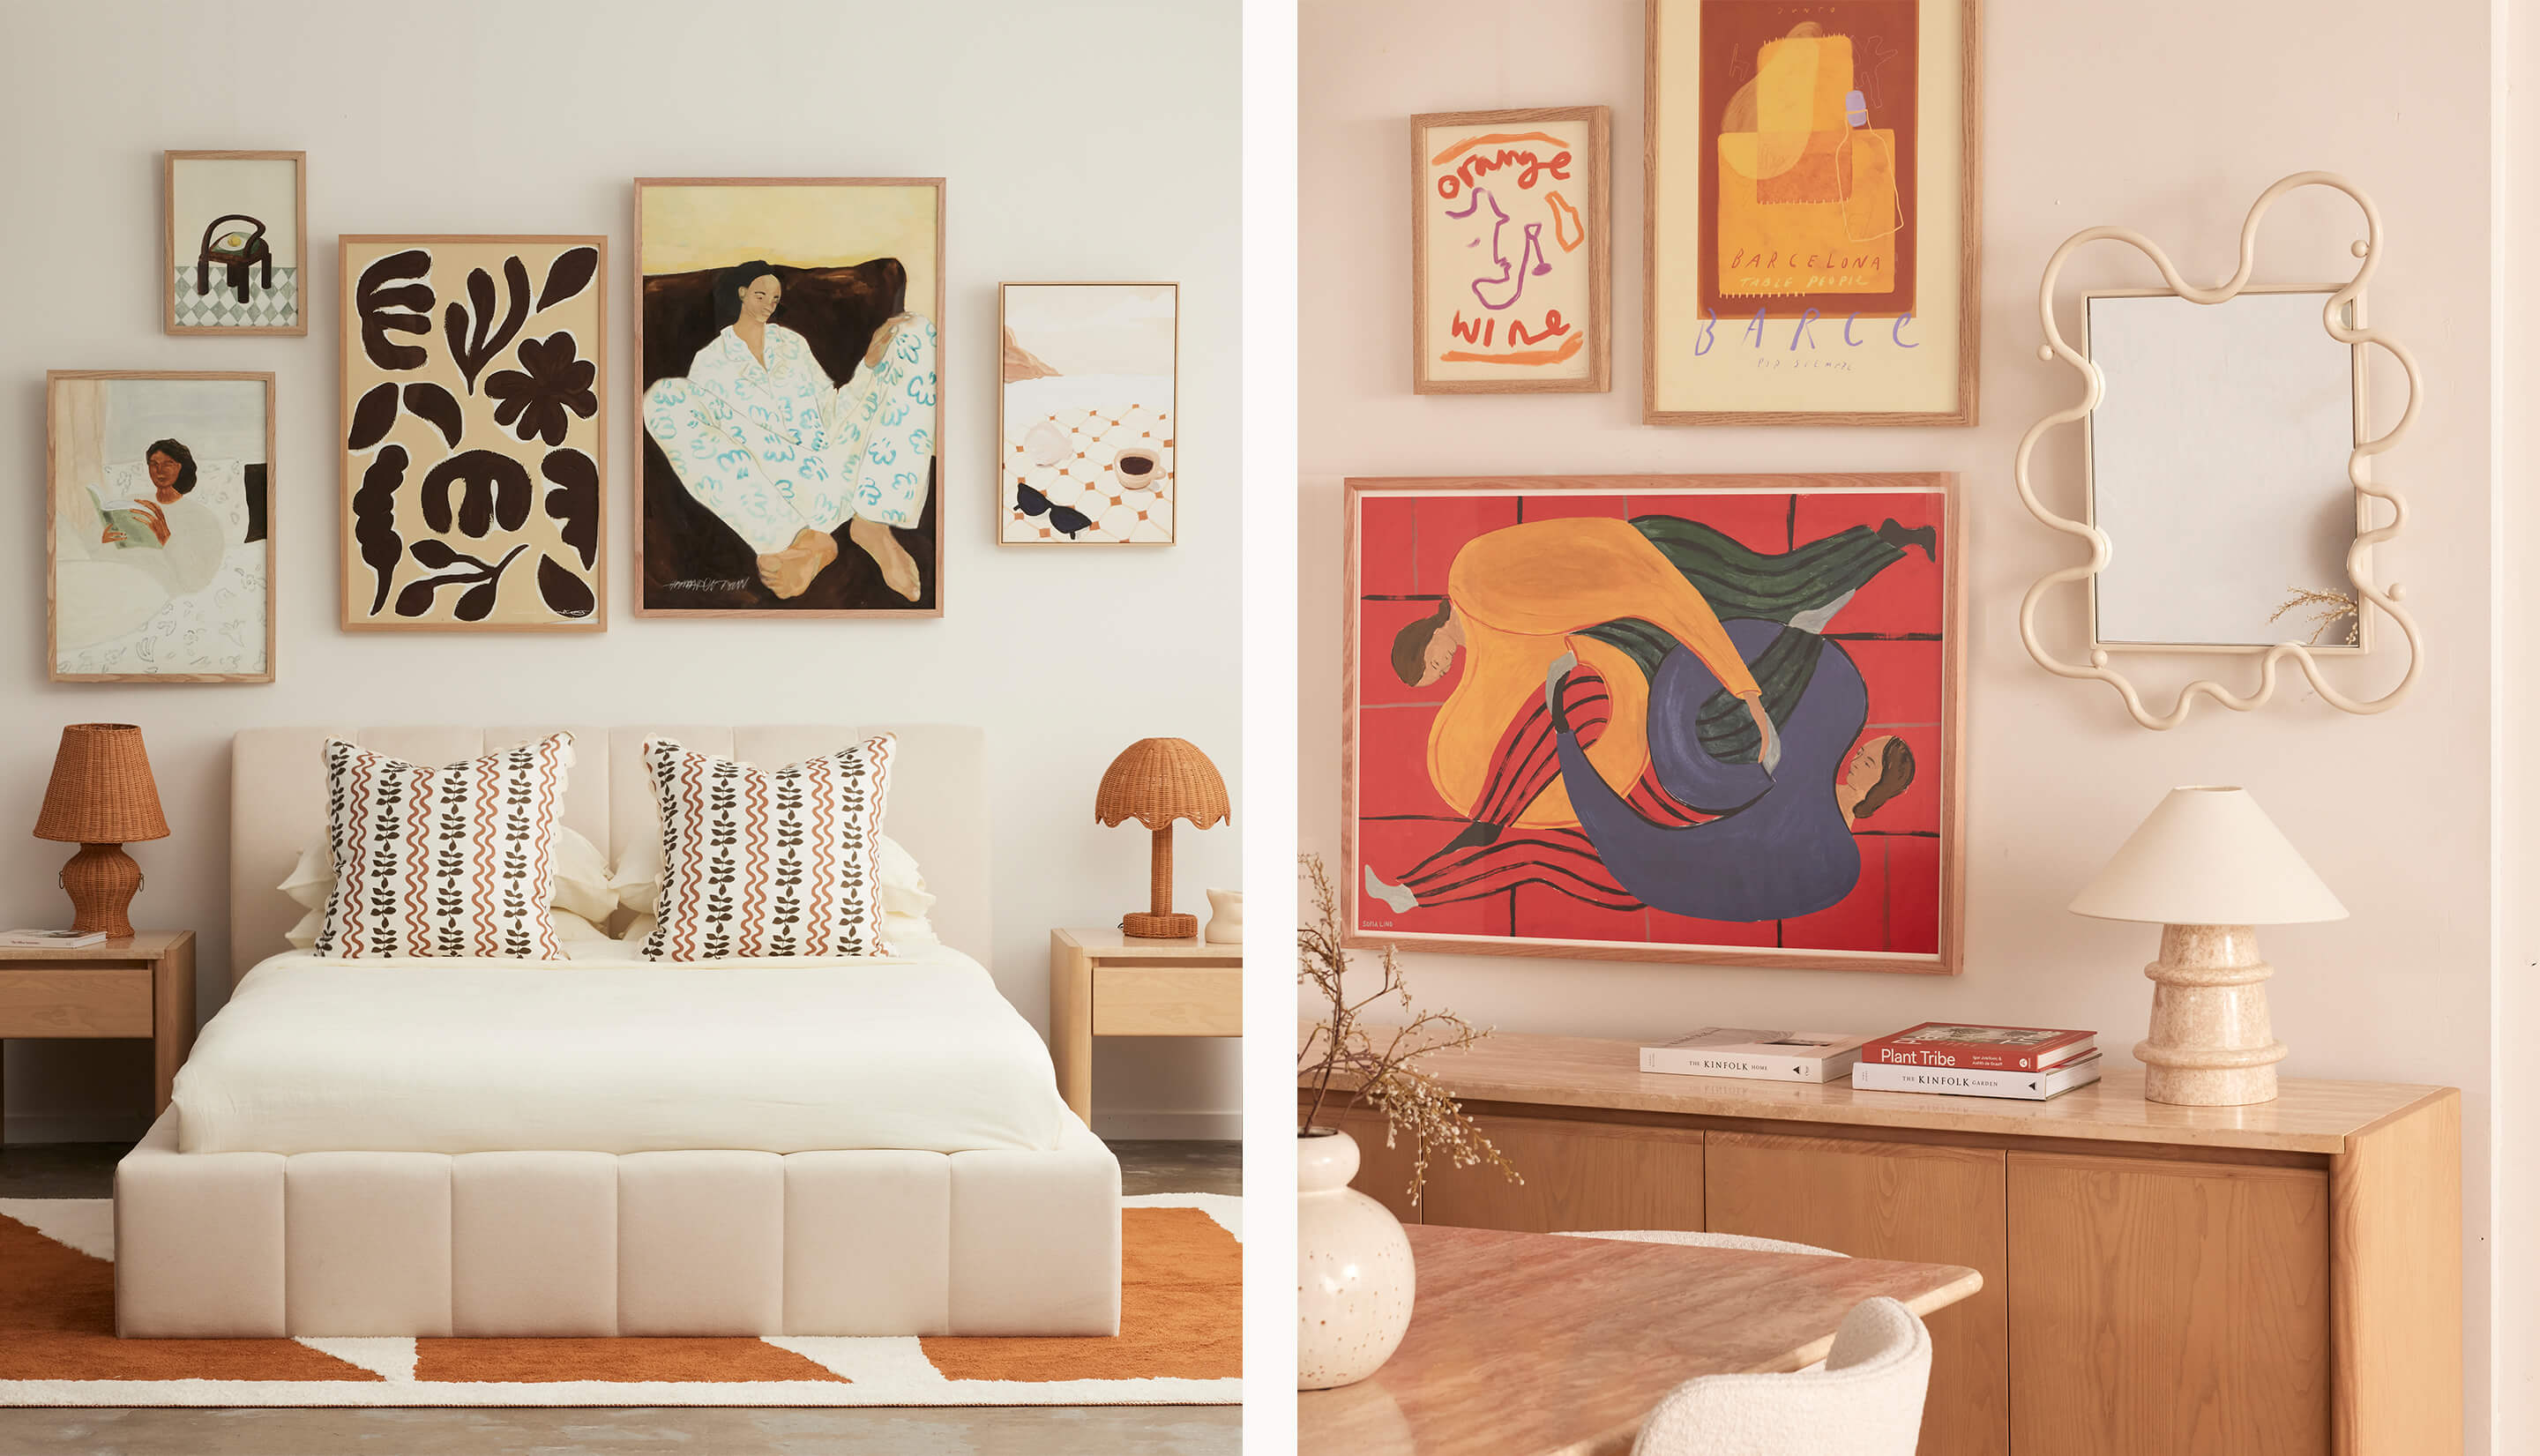 Top tips on how to style a feature art wall, including colourful artworks and mirrors. All available to shop online now!